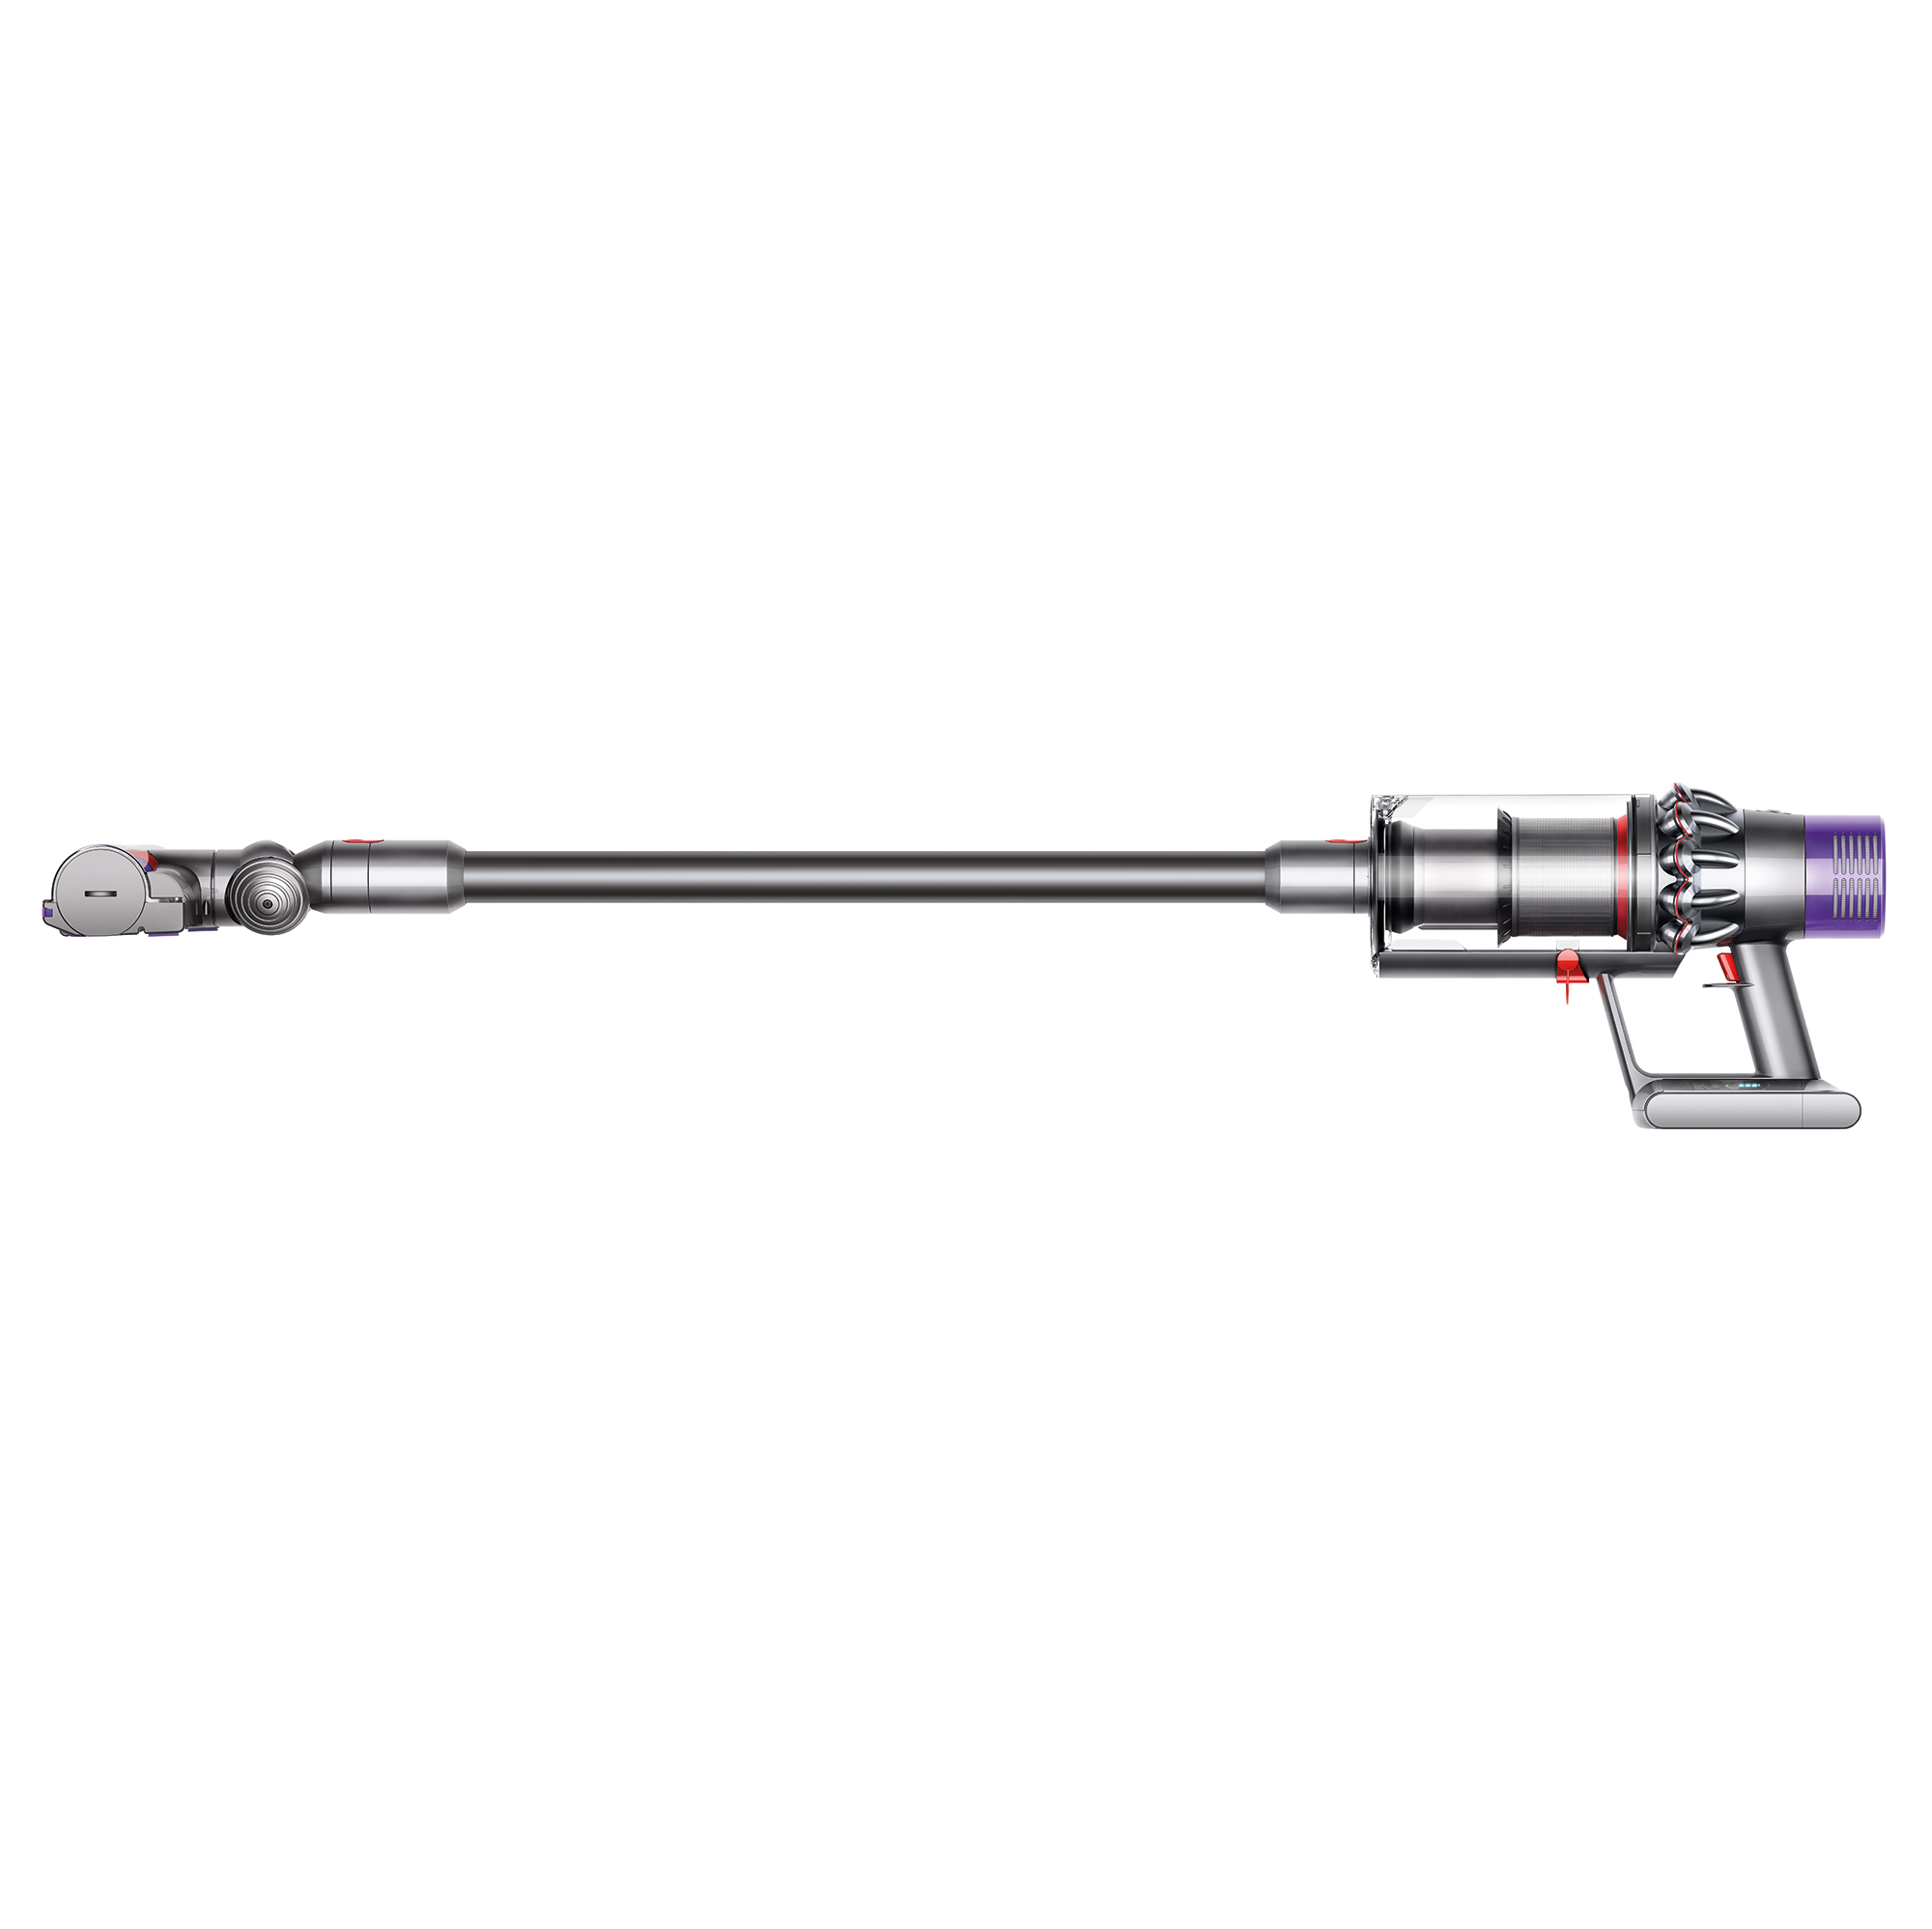 Dyson V10 Total Clean Cordfree Vacuum Cleaner| Iron | Refurbished - image 2 of 6